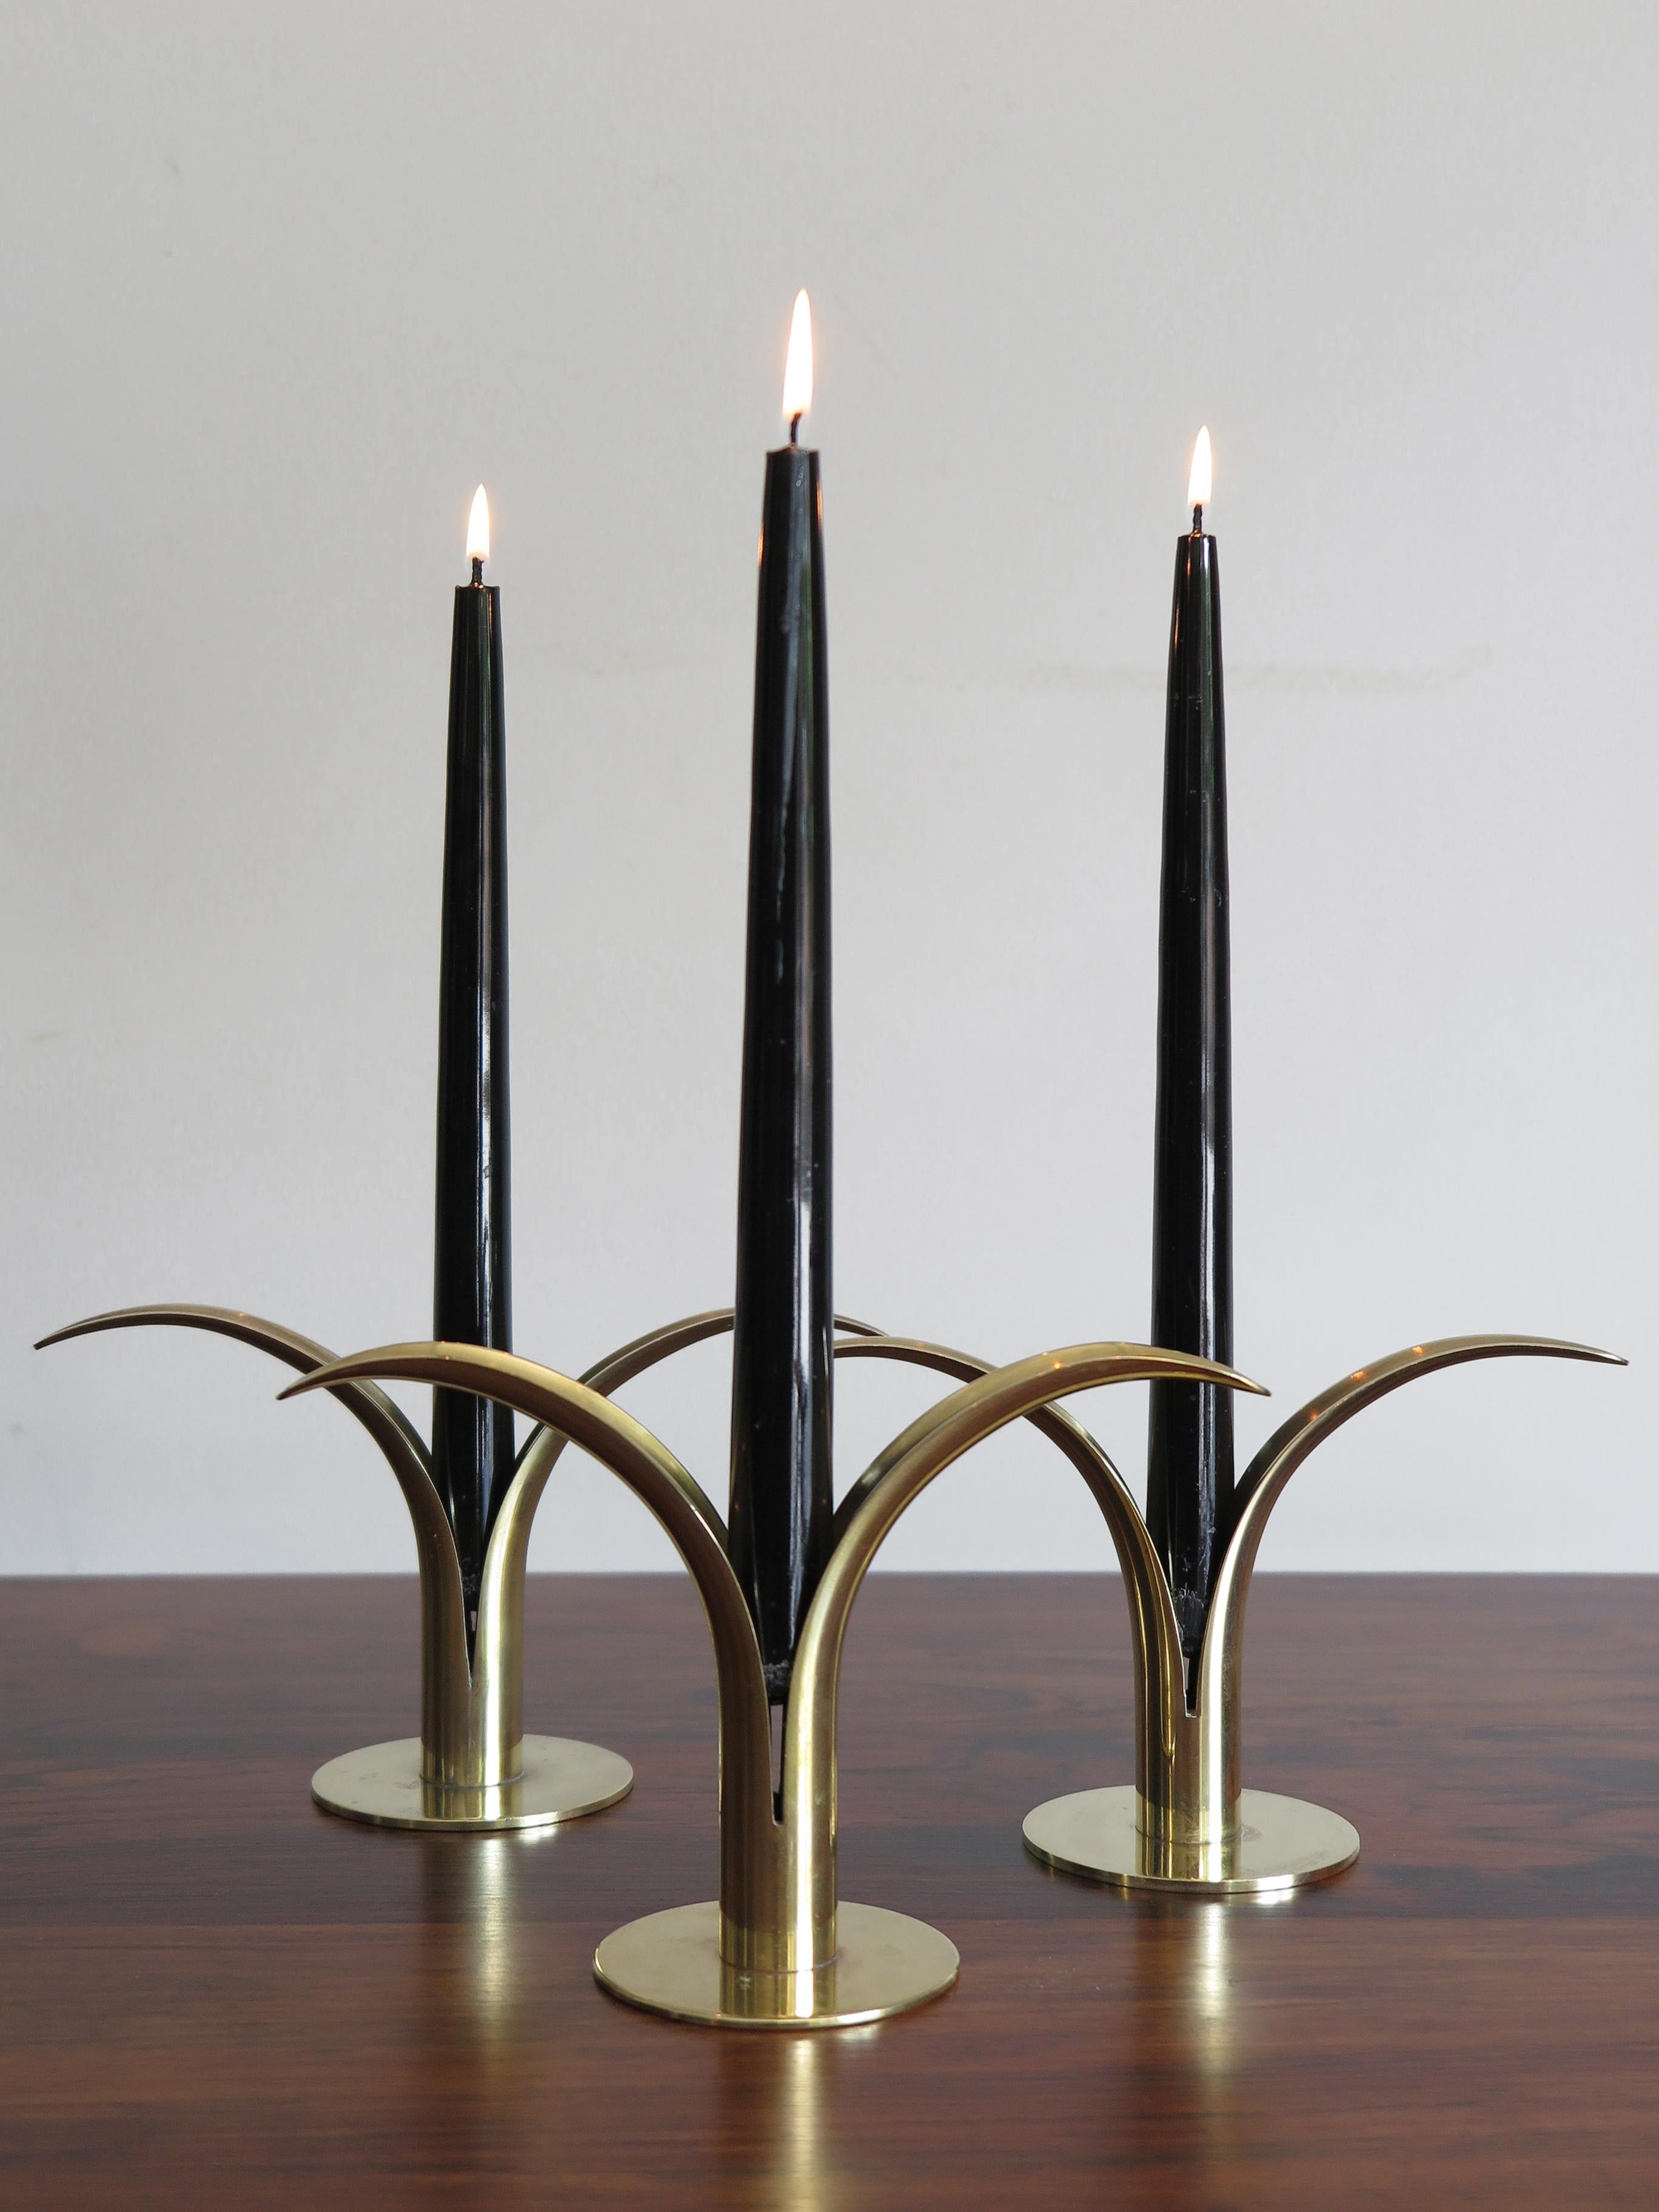 Liljan candleholders set in yellow brass by Ivar Ålenius Björk for Ystad Metall, Sweden, circa 1940.

Please note that the items are original of the period and this shows normal signs of age and use.